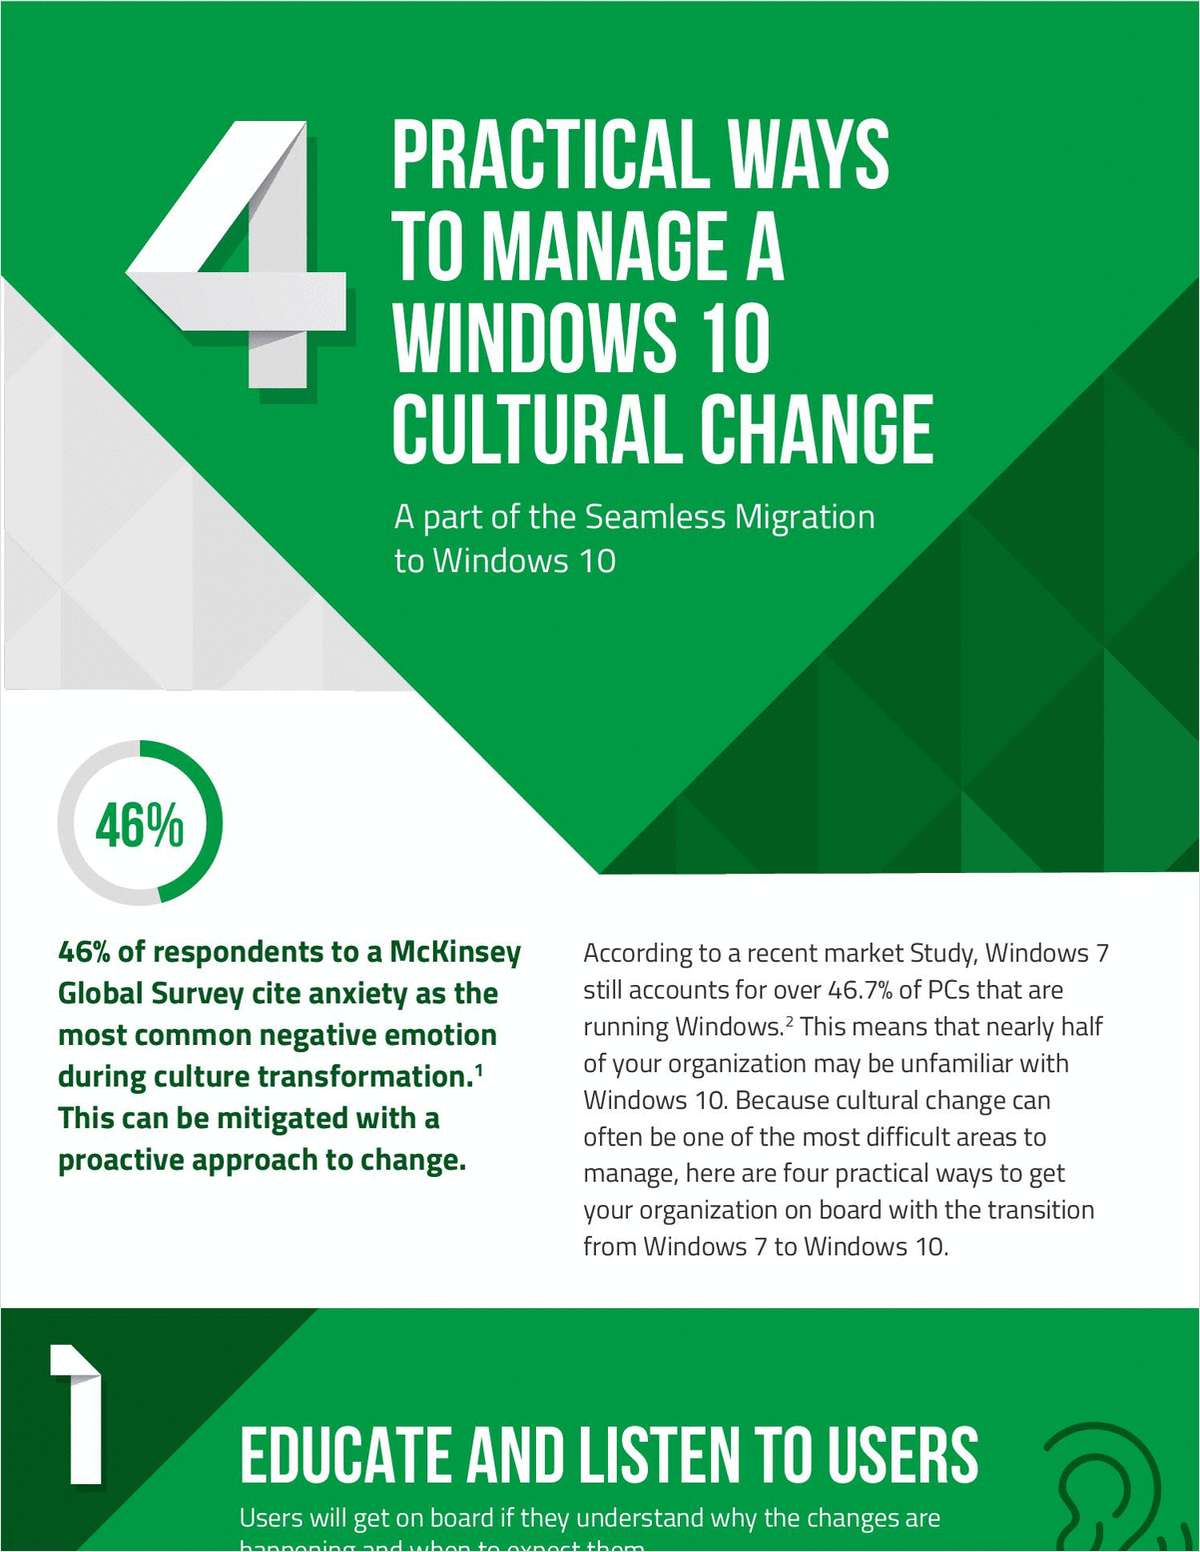 4 Practical Ways to Manage a Windows 10 Cultural Change